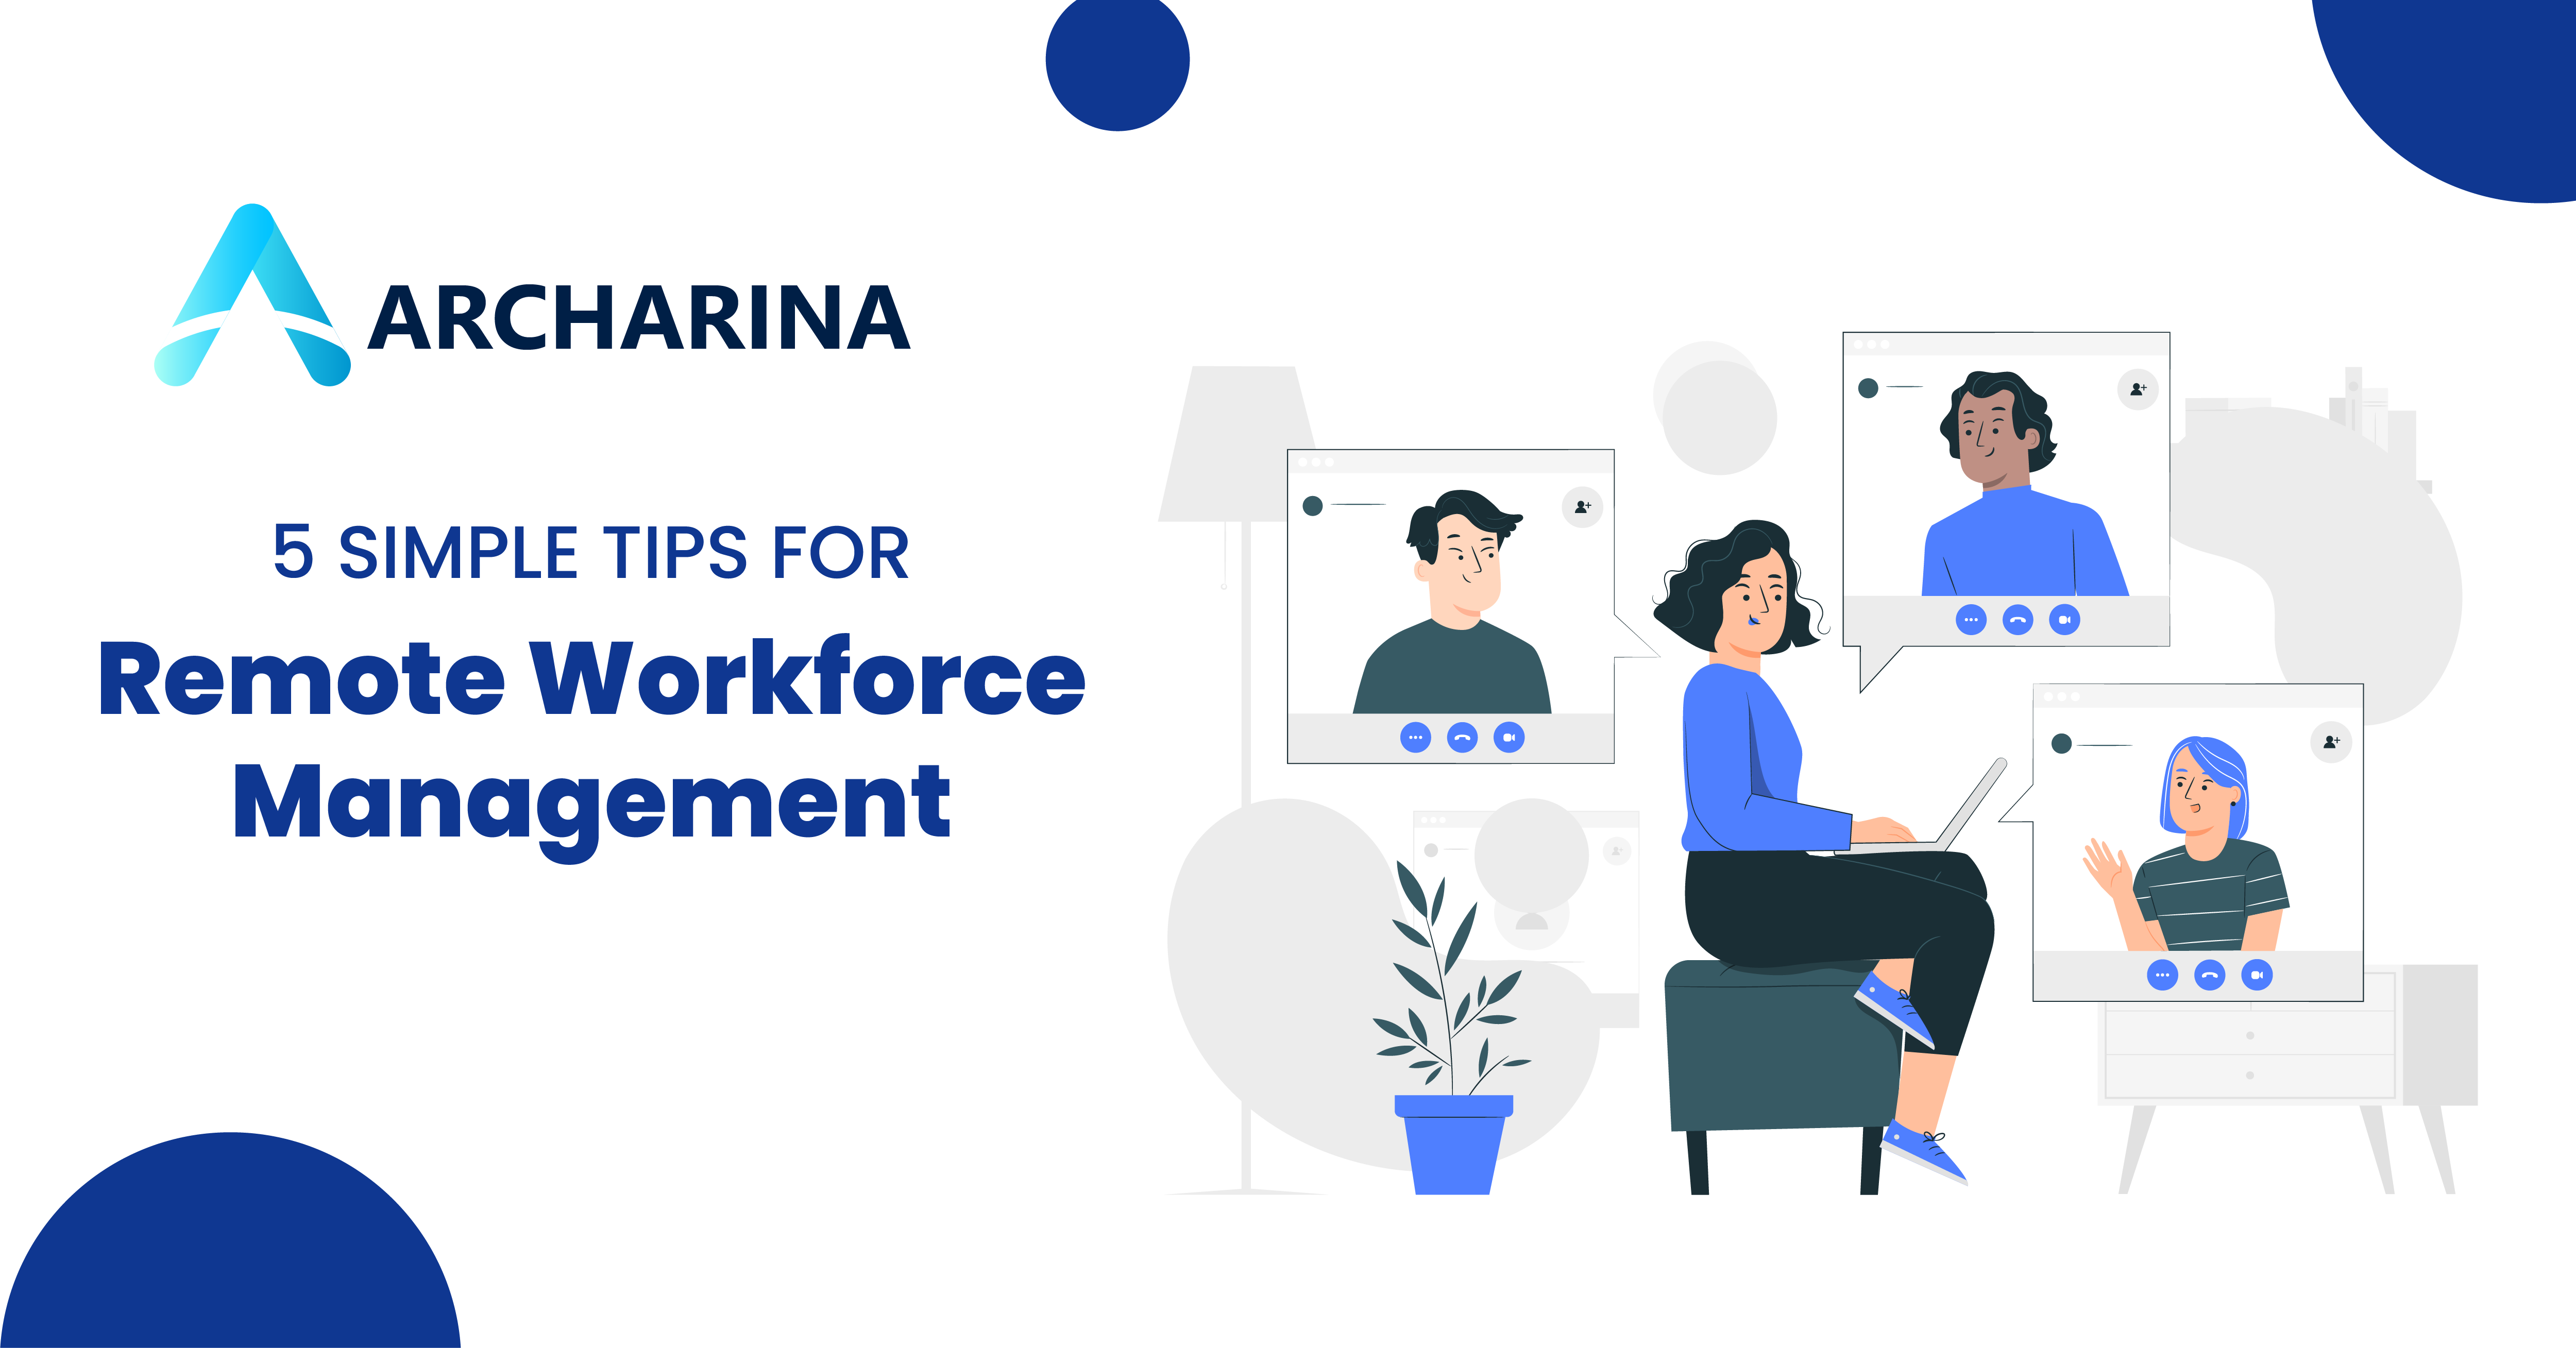 5 Simple Tips for Remote Workforce Management